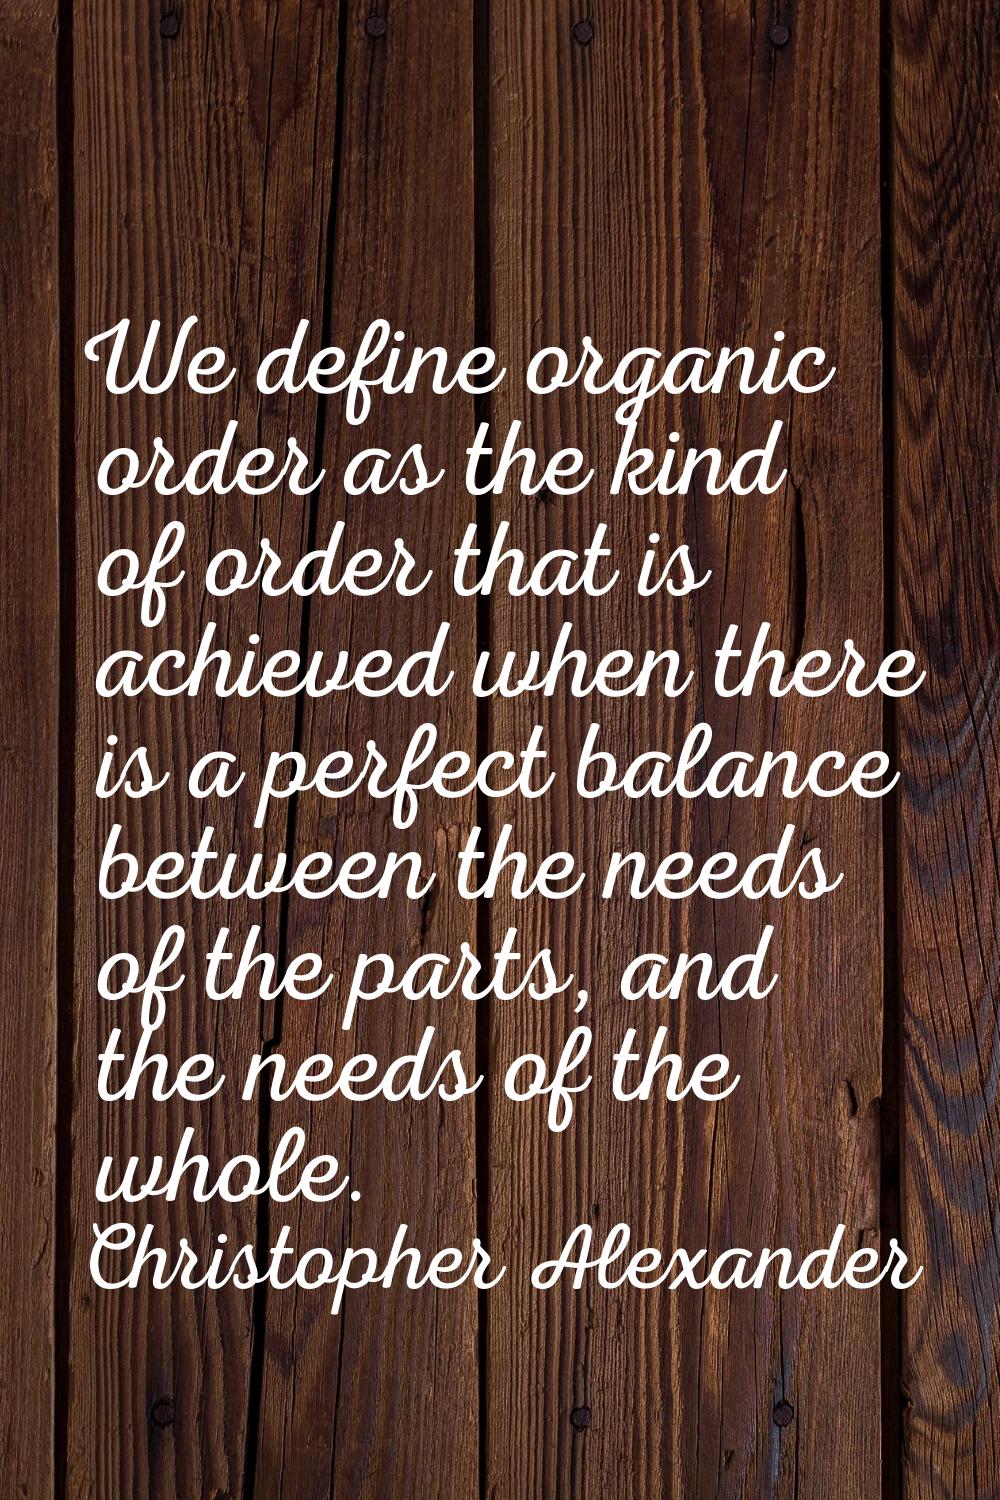 We define organic order as the kind of order that is achieved when there is a perfect balance betwe